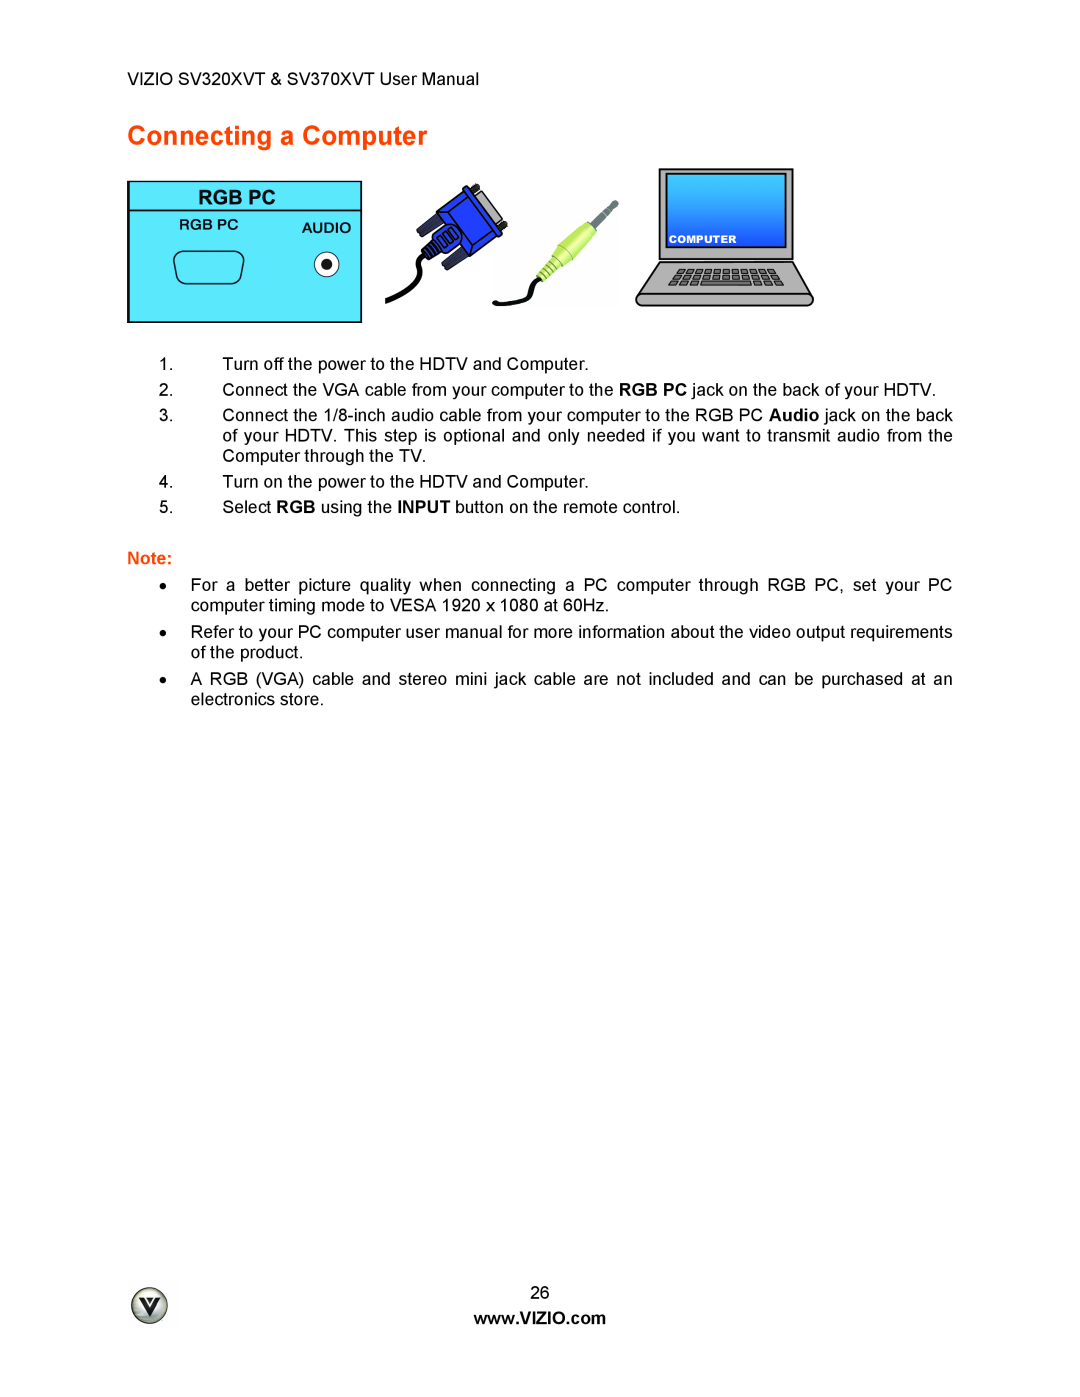 Vizio SV320XVT, SV370XVT user manual Connecting a Computer 